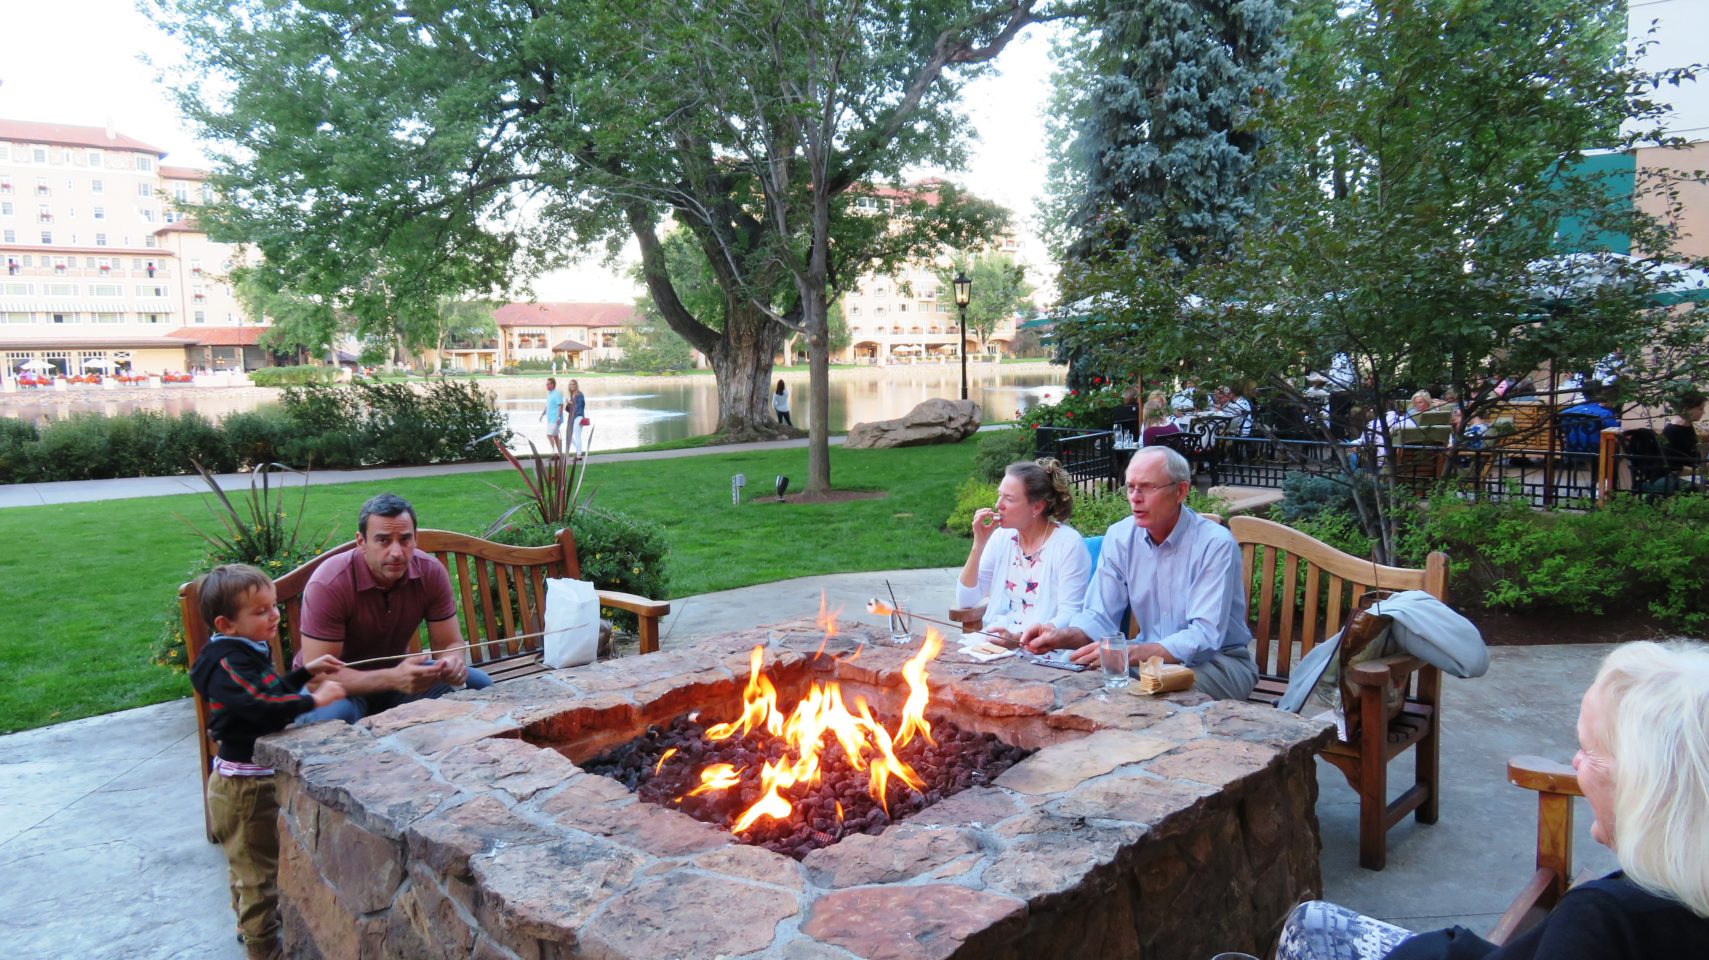 Old and young alike enjoy roasting marshmallows at The Broadmoor